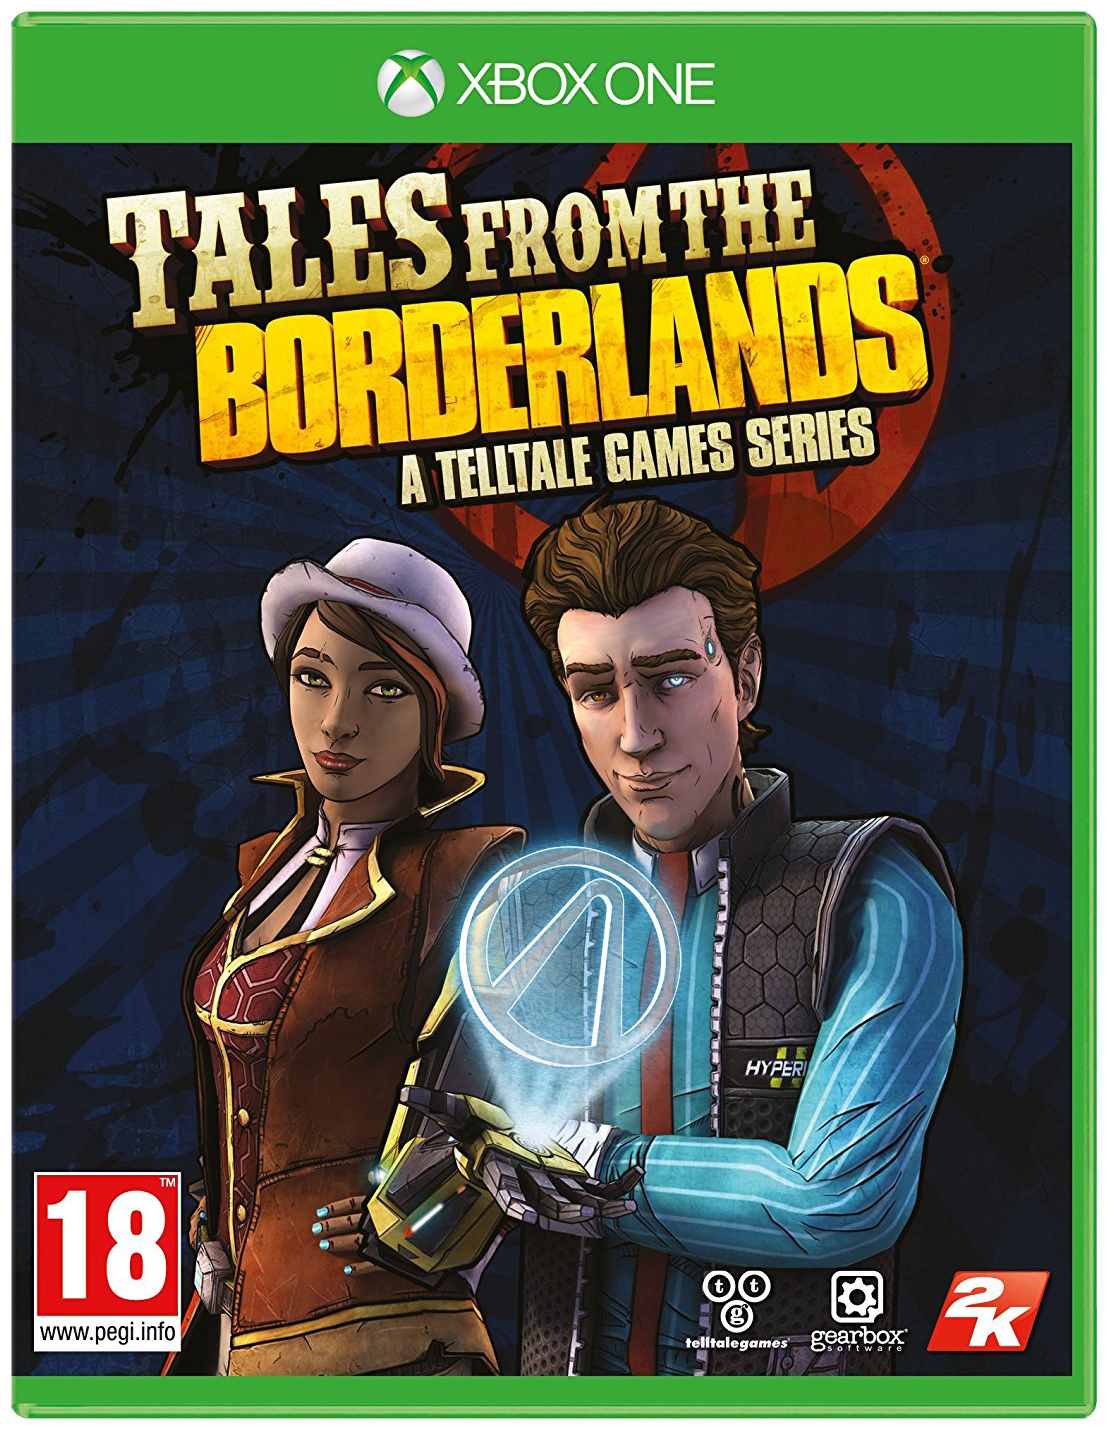 фото Игра tales from the borderlands для xbox one telltale games